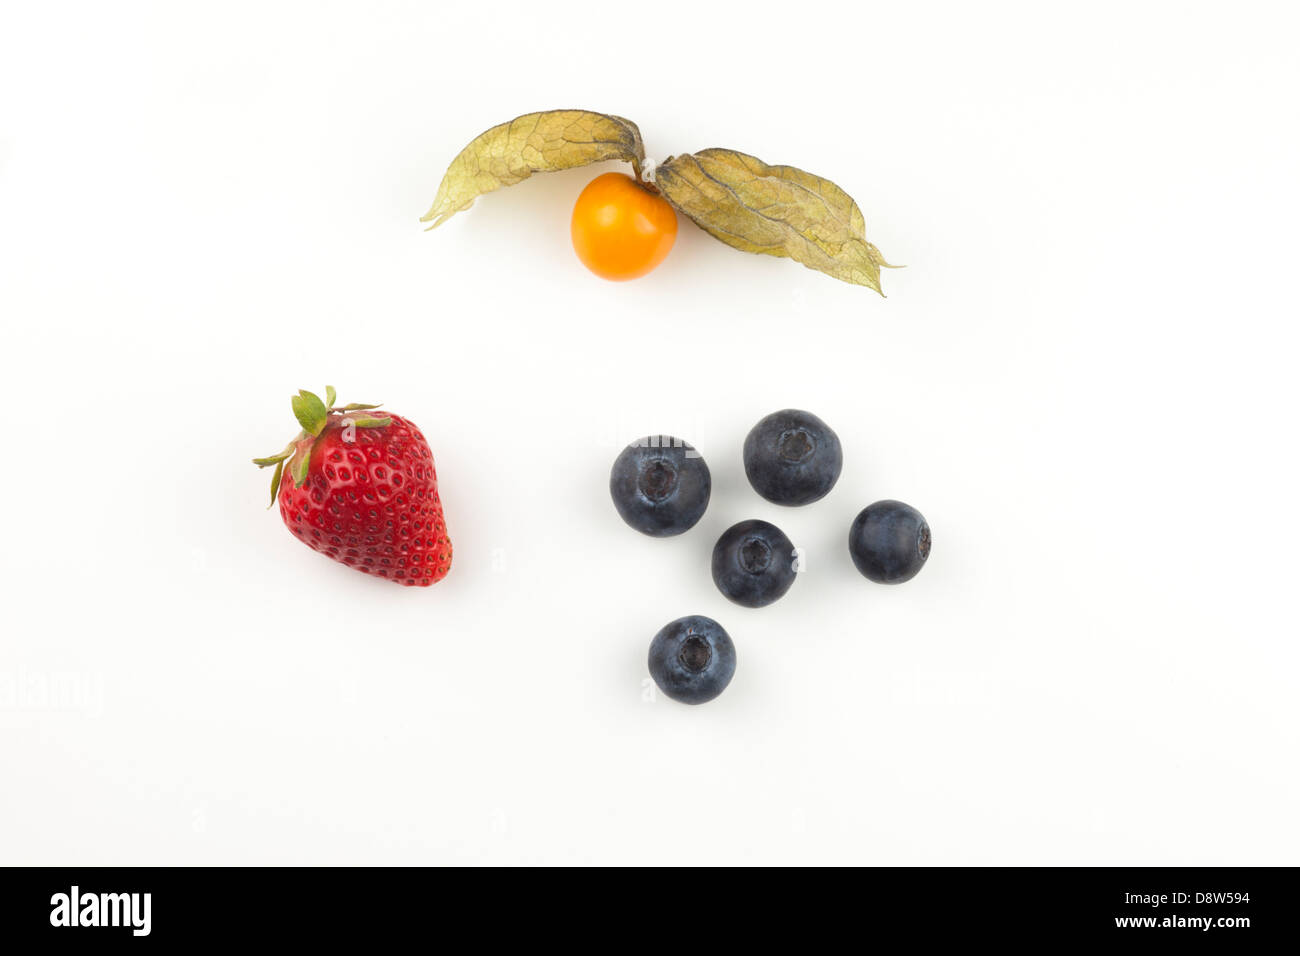 Fresh fruit:  golden berry (Physalis peruviana), strawberry and blueberries, on white background Stock Photo